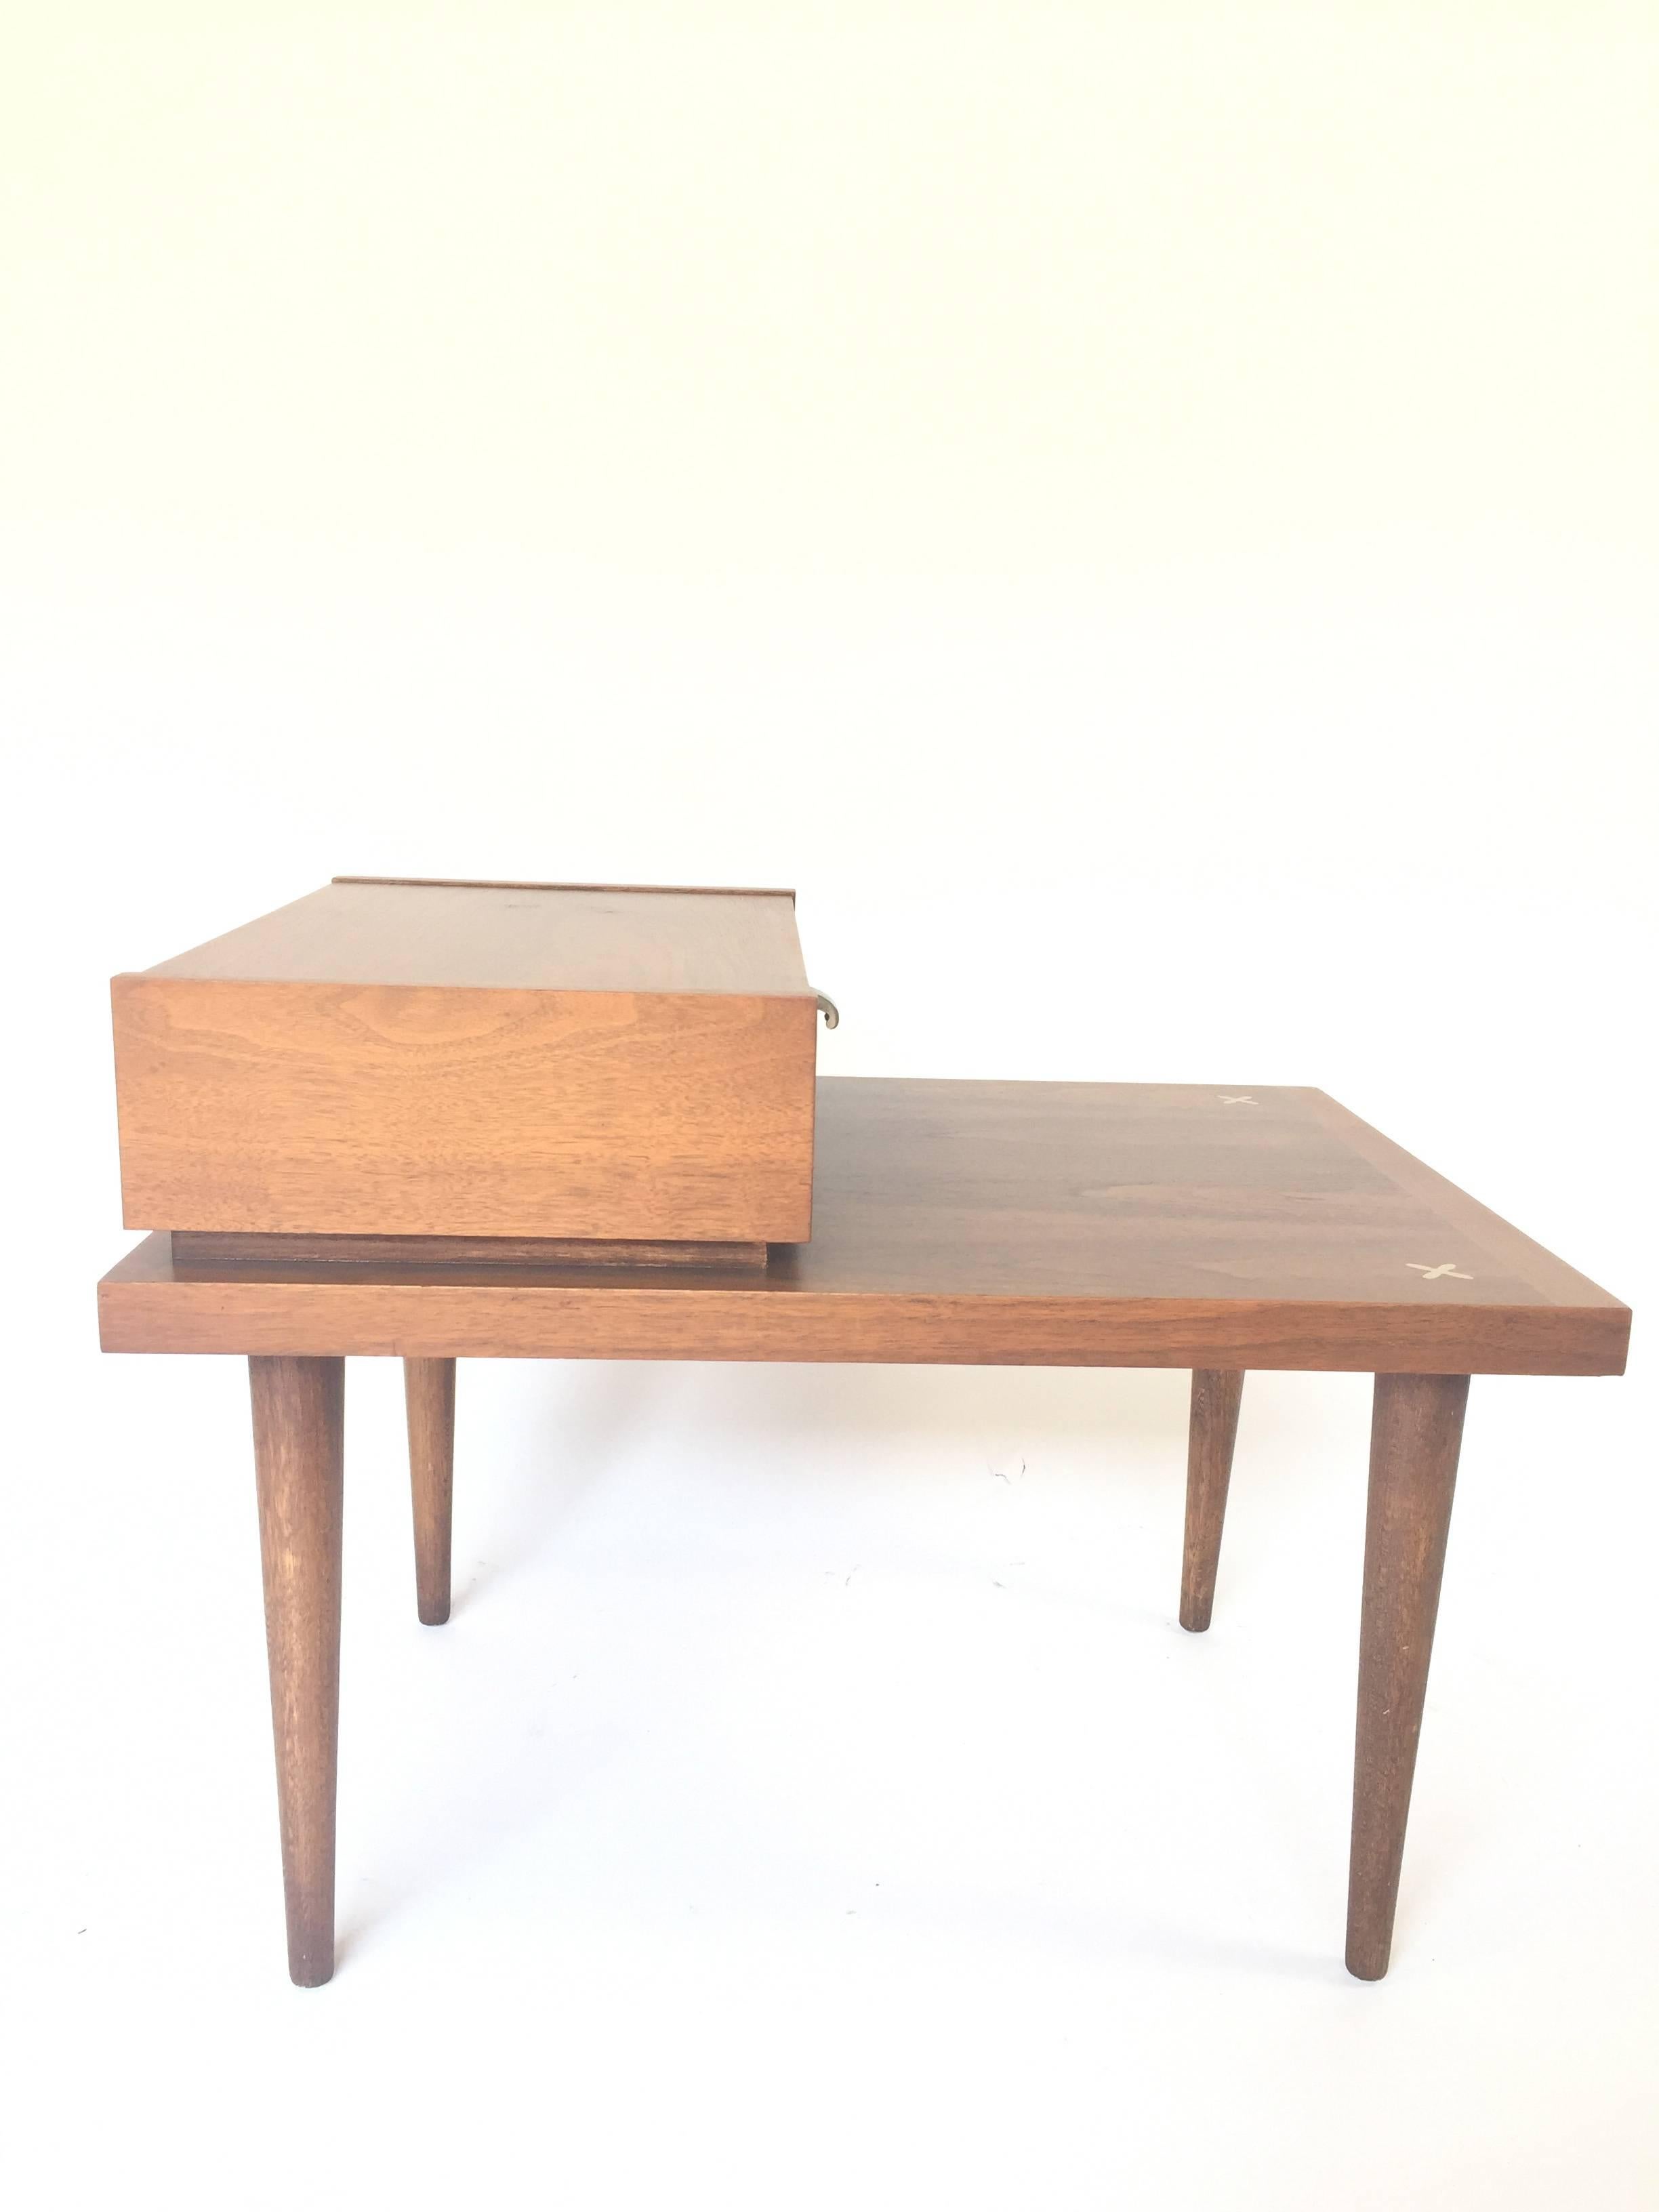 Pair of Mid-Century Modern nightstands or end tables by American of Martinsville. Features beautifully refinished walnut, an attractive step design, and a single drawer with George Nelson style J-pulls. Unique X-shaped ornamental inlays in brushed